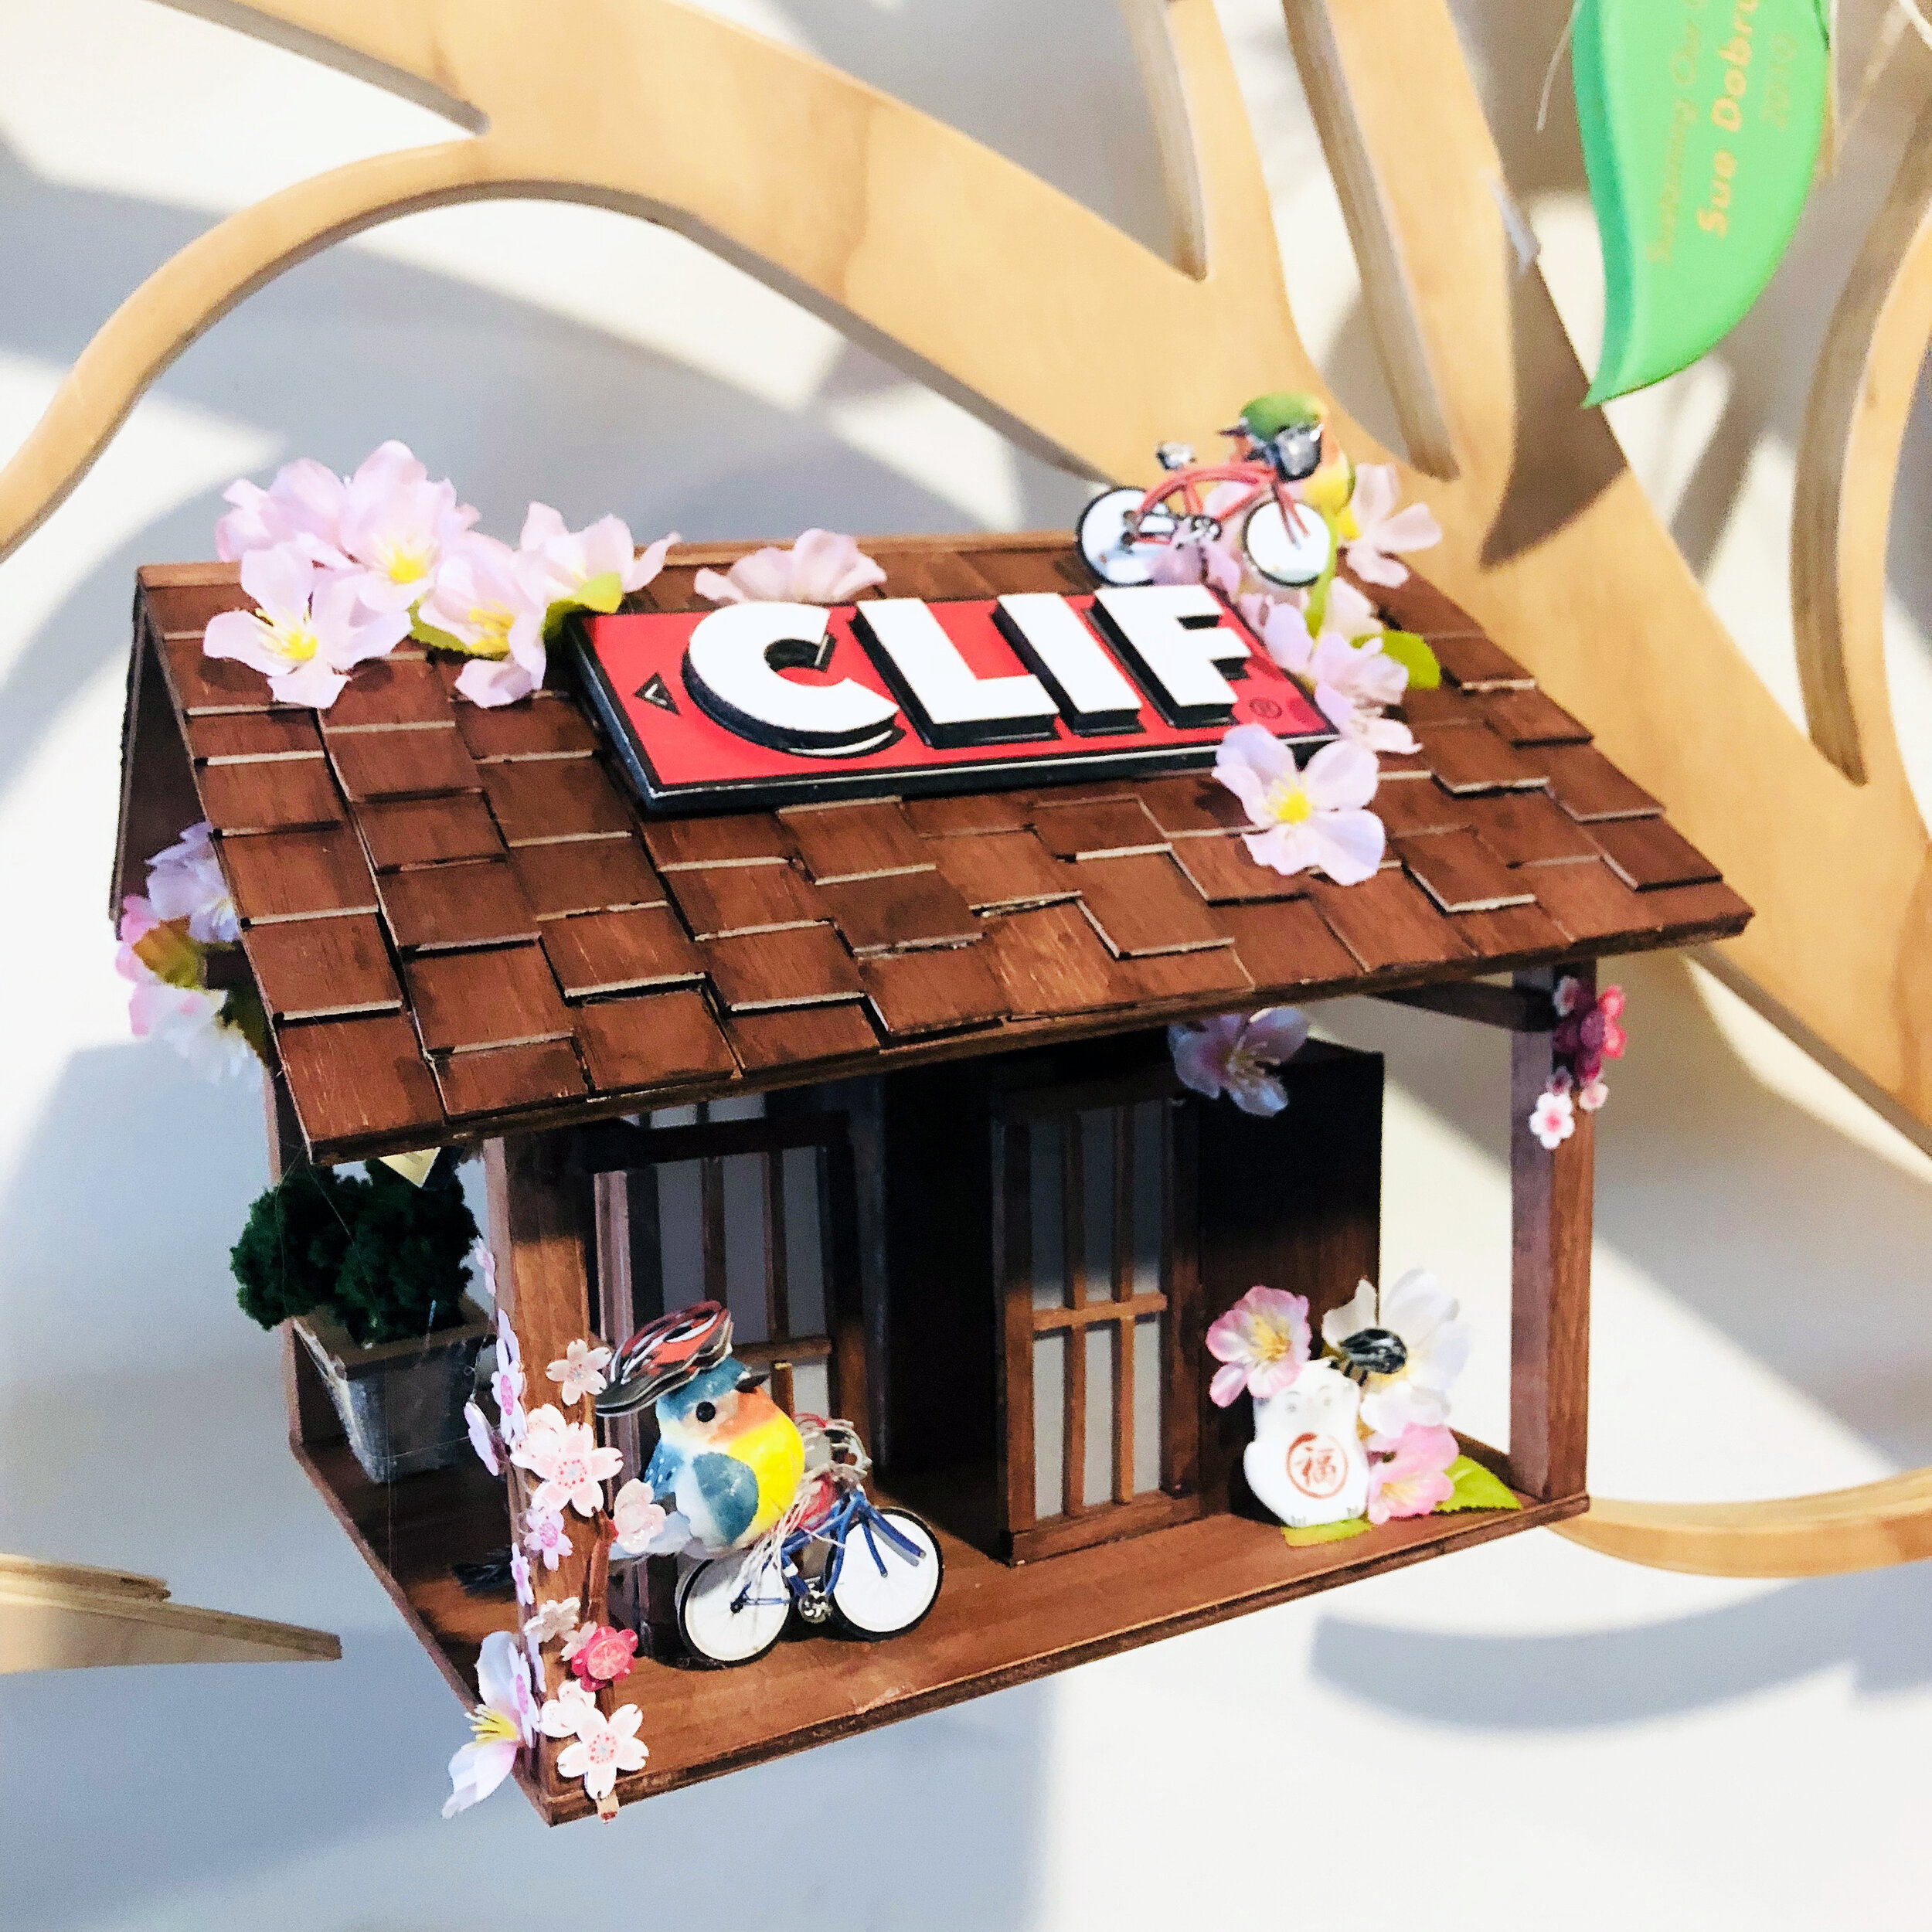 Dojo Themed Birdhouse with Cherry Blossoms, 2018